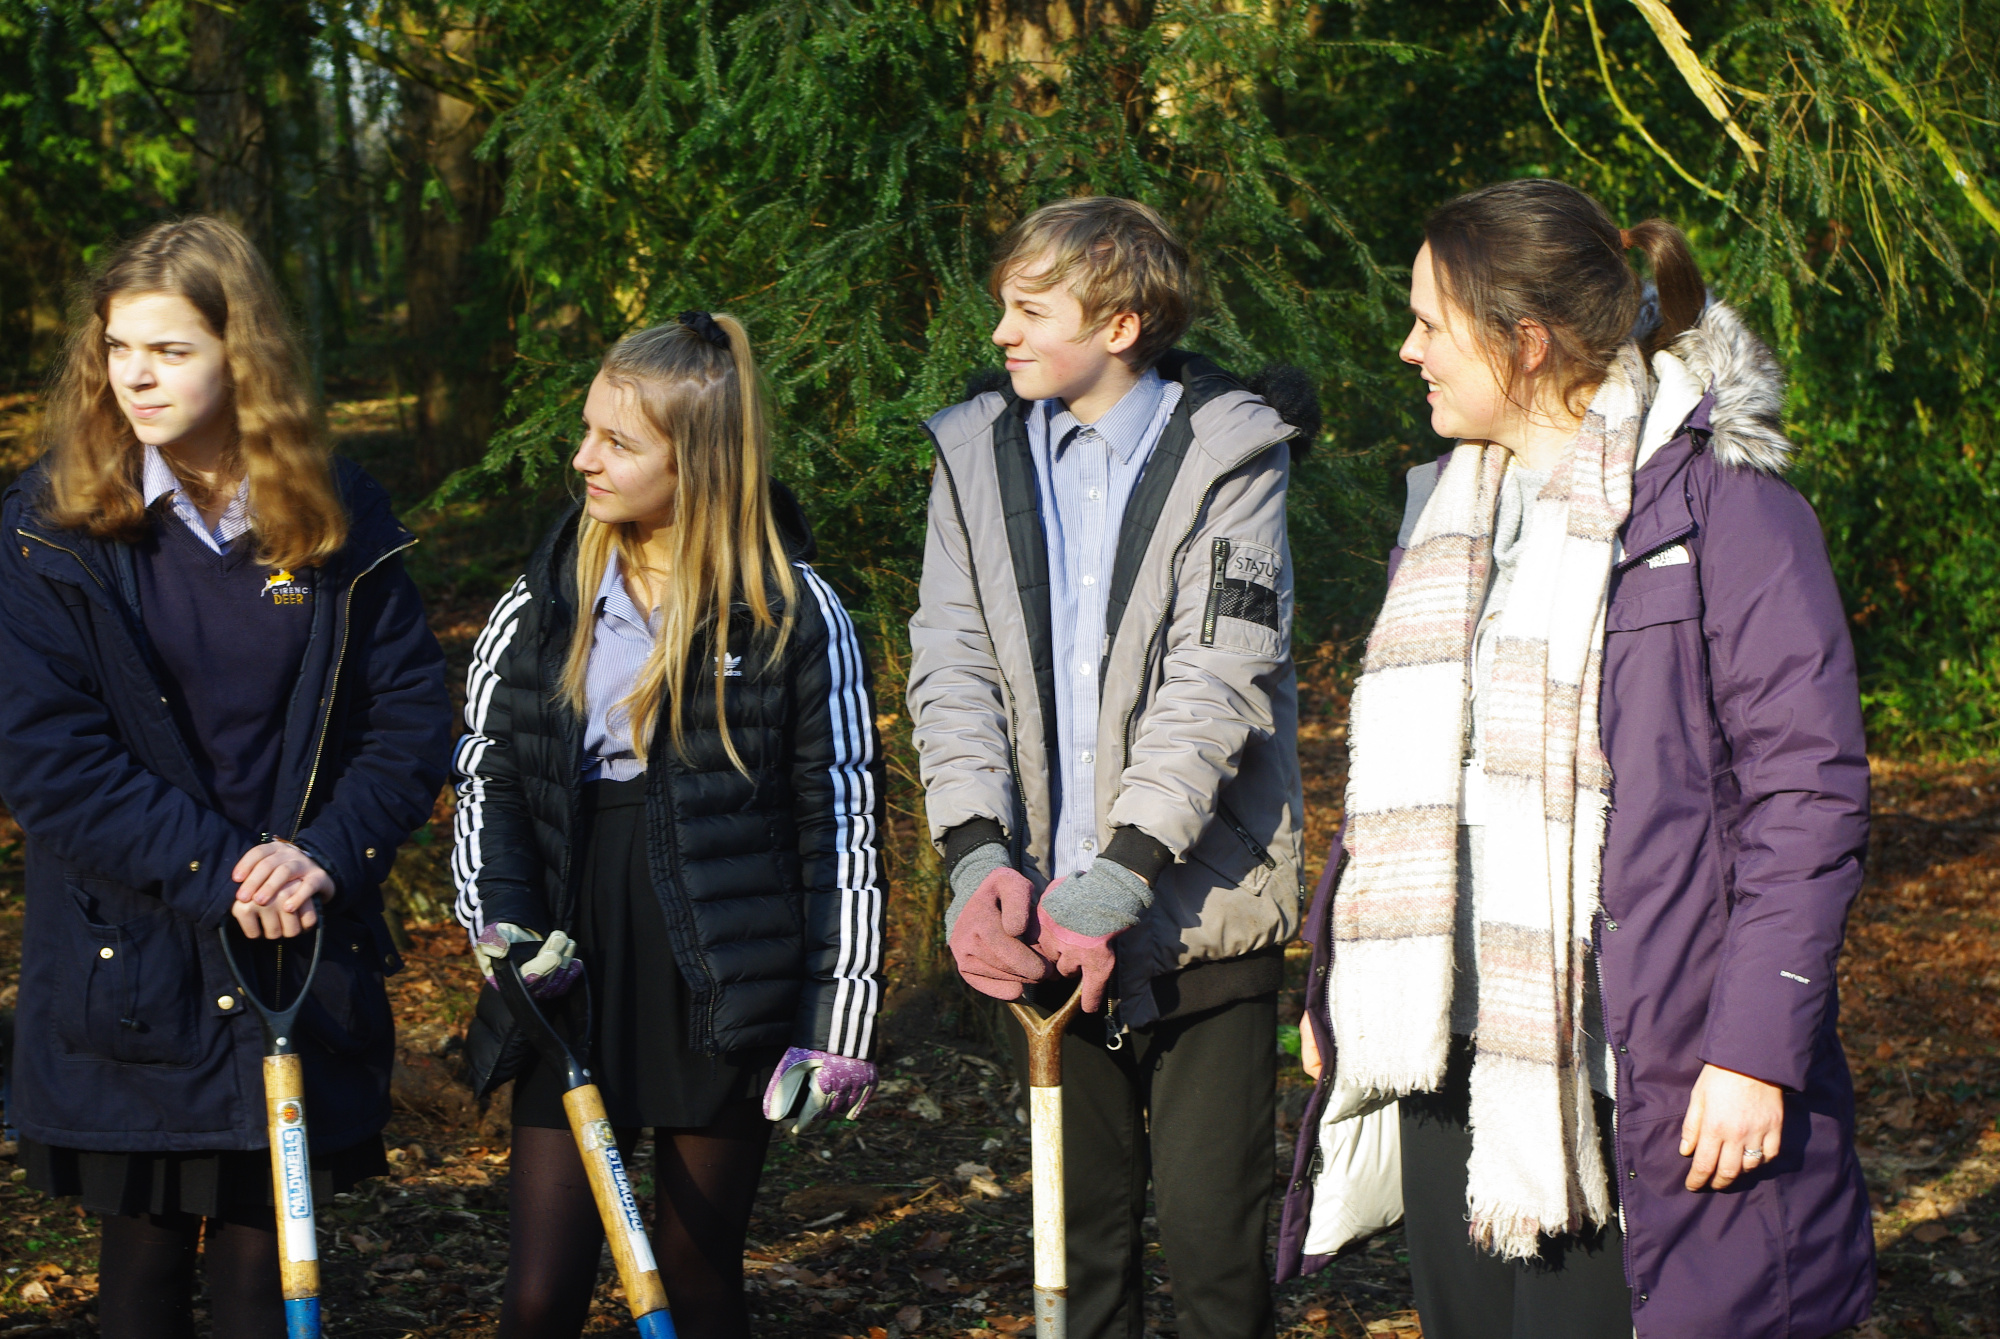 Horticulture pupils tree planting in Cirencester Park 